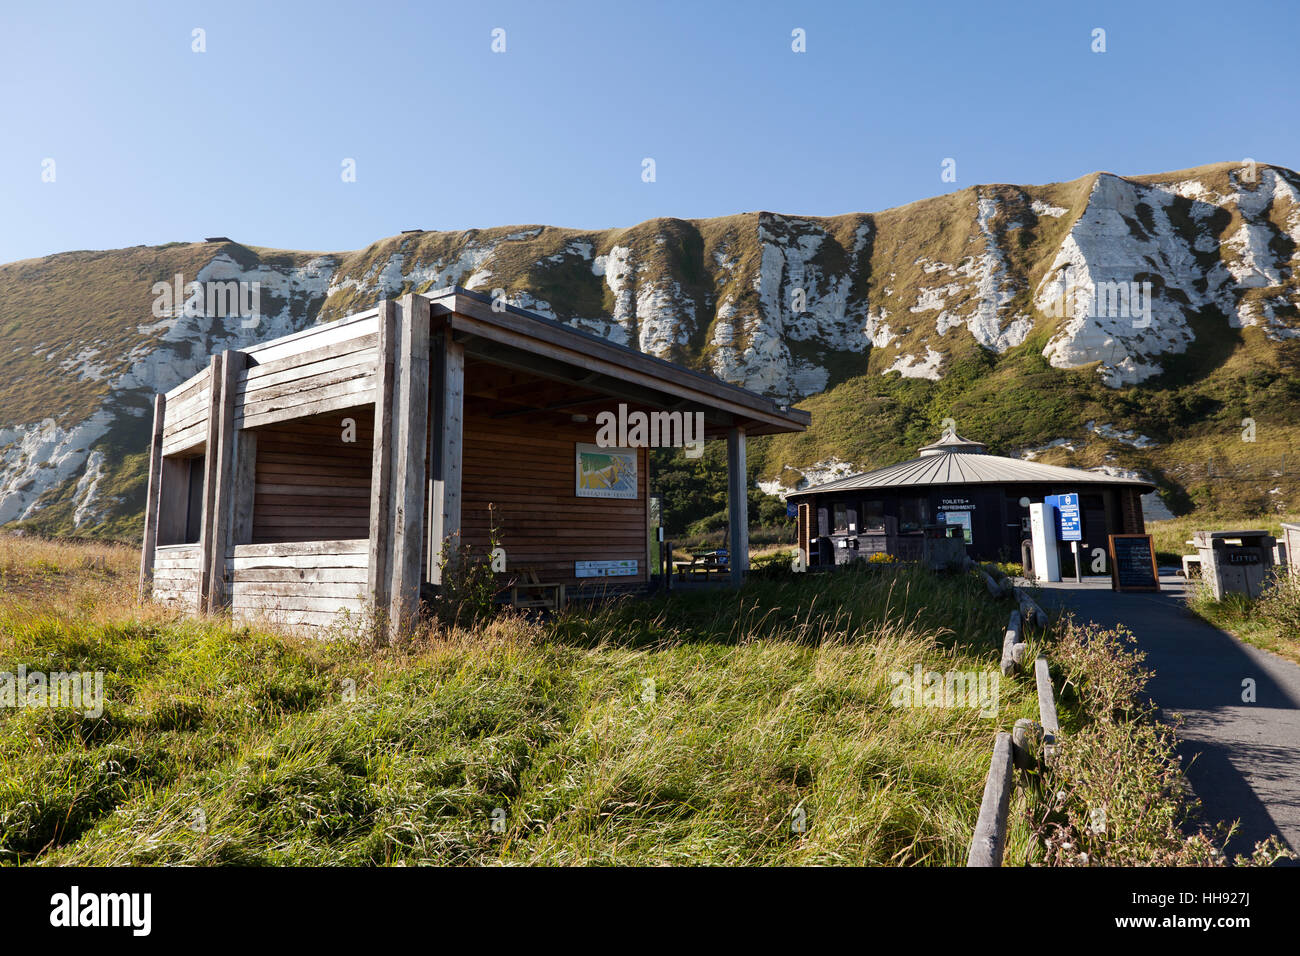 Wide-Angle image of the  Educational Shelter and Café below the cliffs at Samphire Hoe. Stock Photo